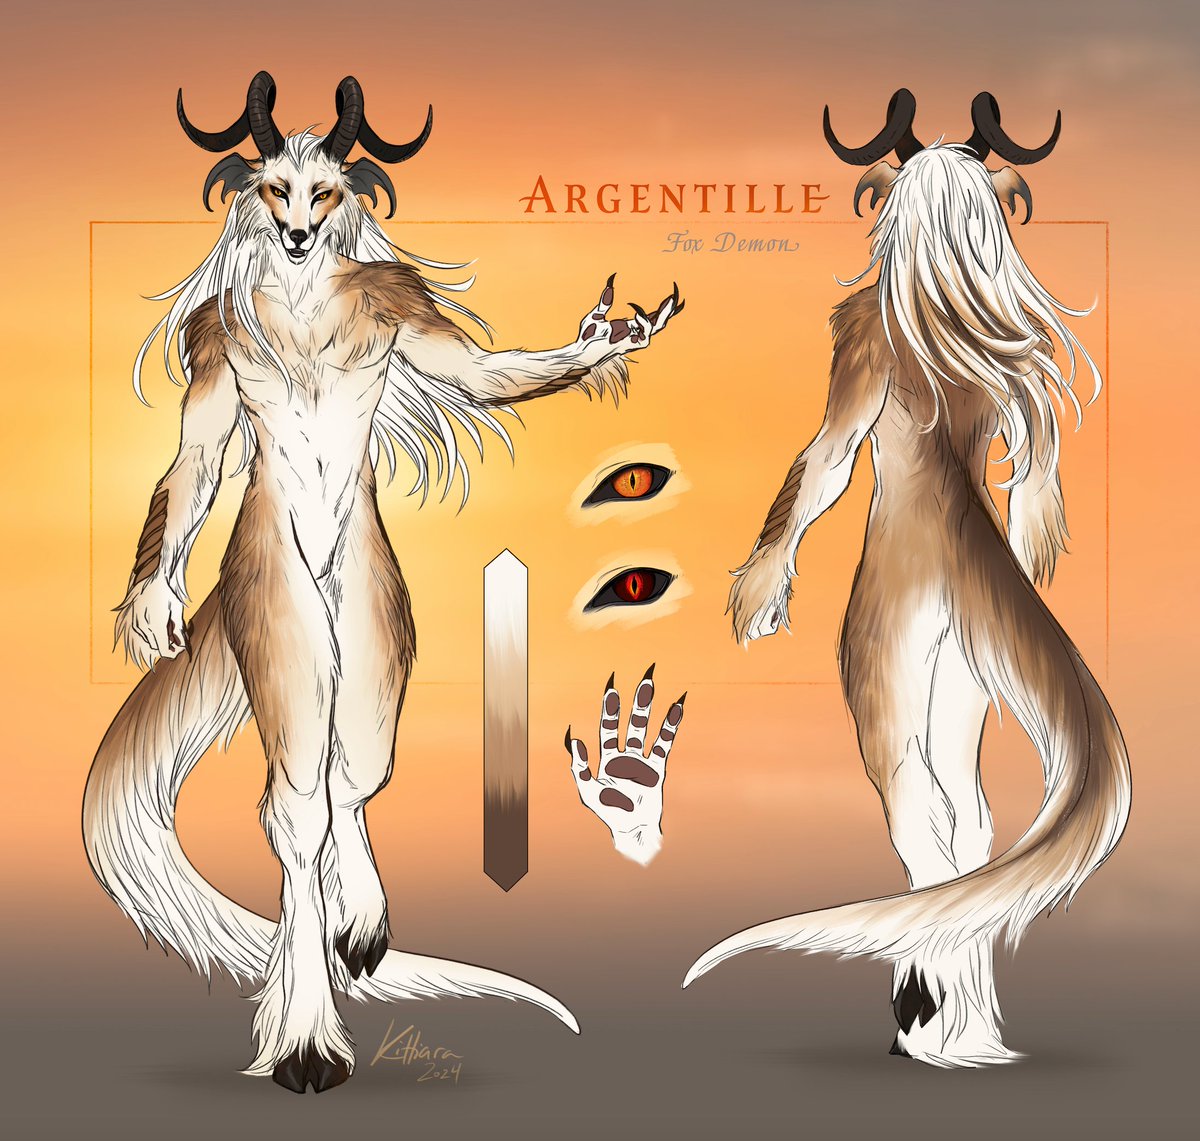 Character sheet of Argentille for @gyrhawk ! Based on the original design of his fursuit from Clockwork Creature. Working through my queue more steadily now 8)